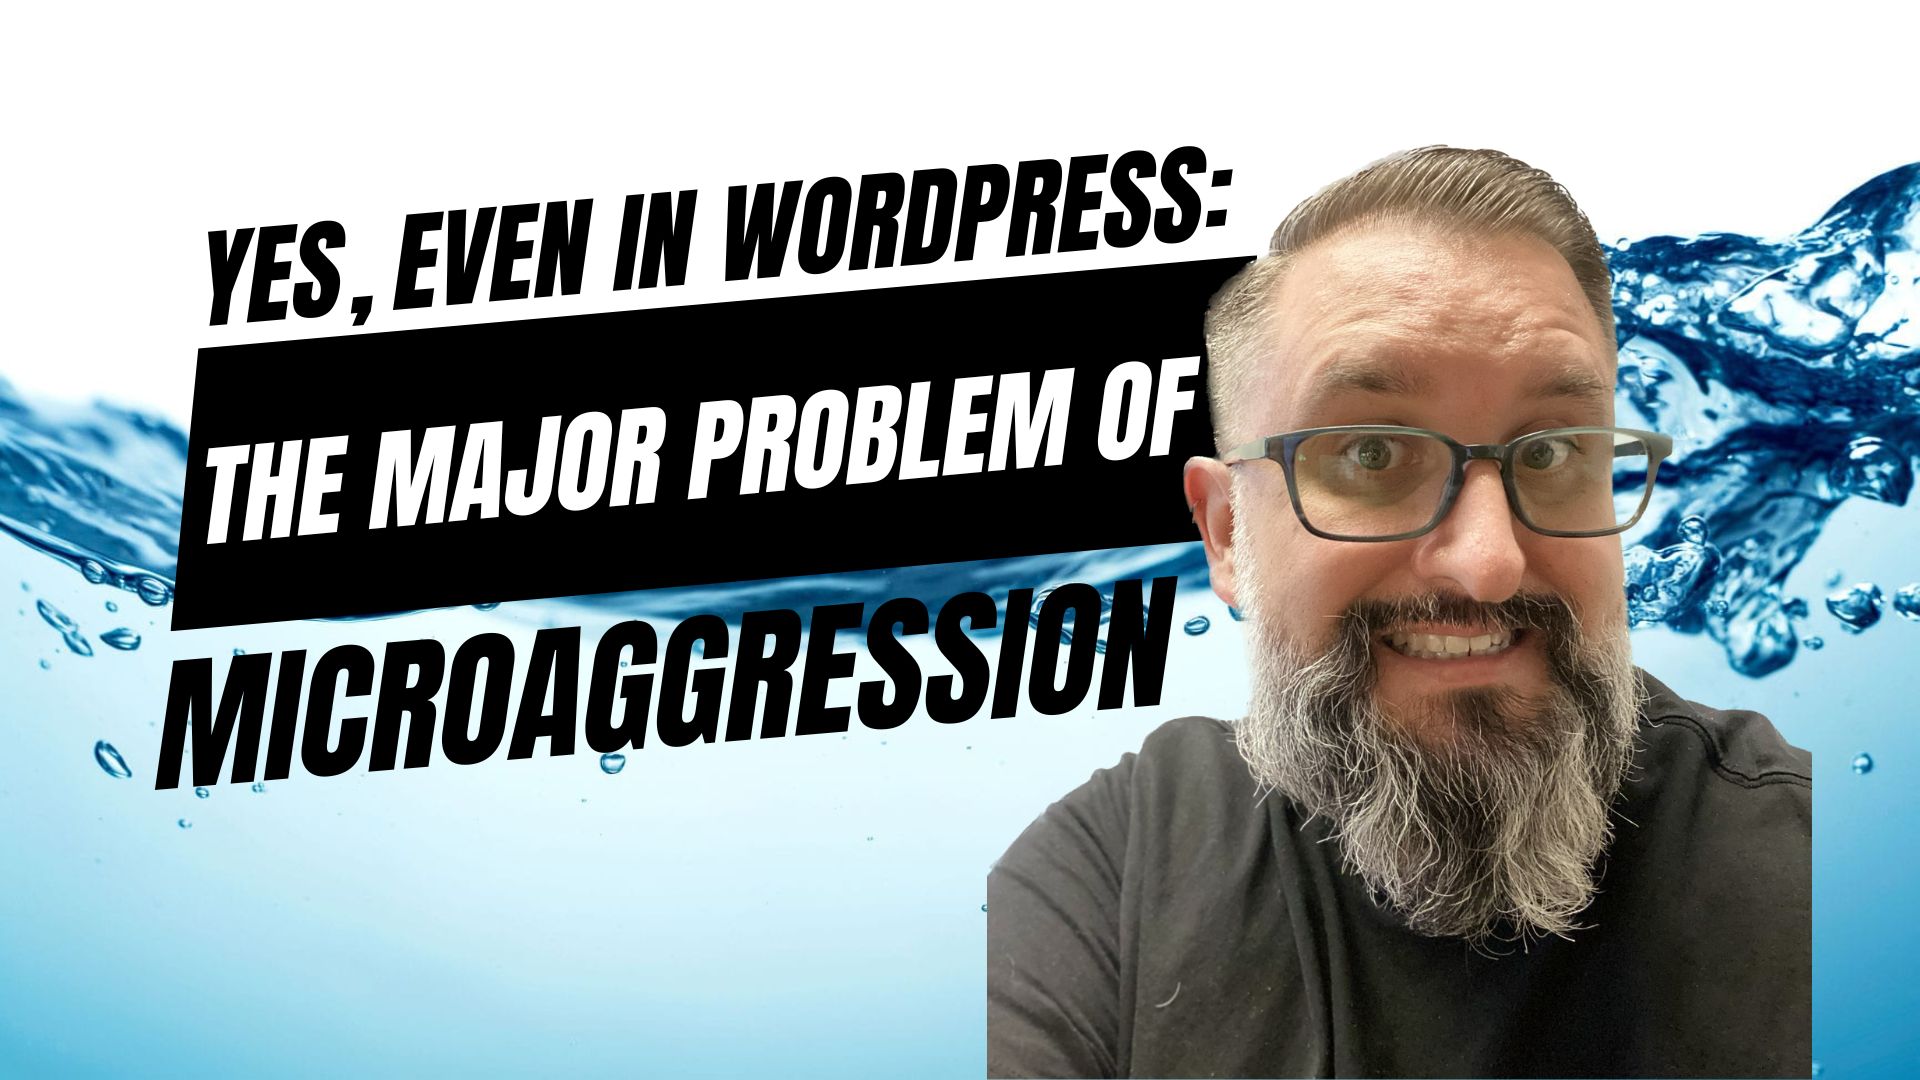 EP431 – Yes, Even in WordPress: The Major Problem of Microaggression